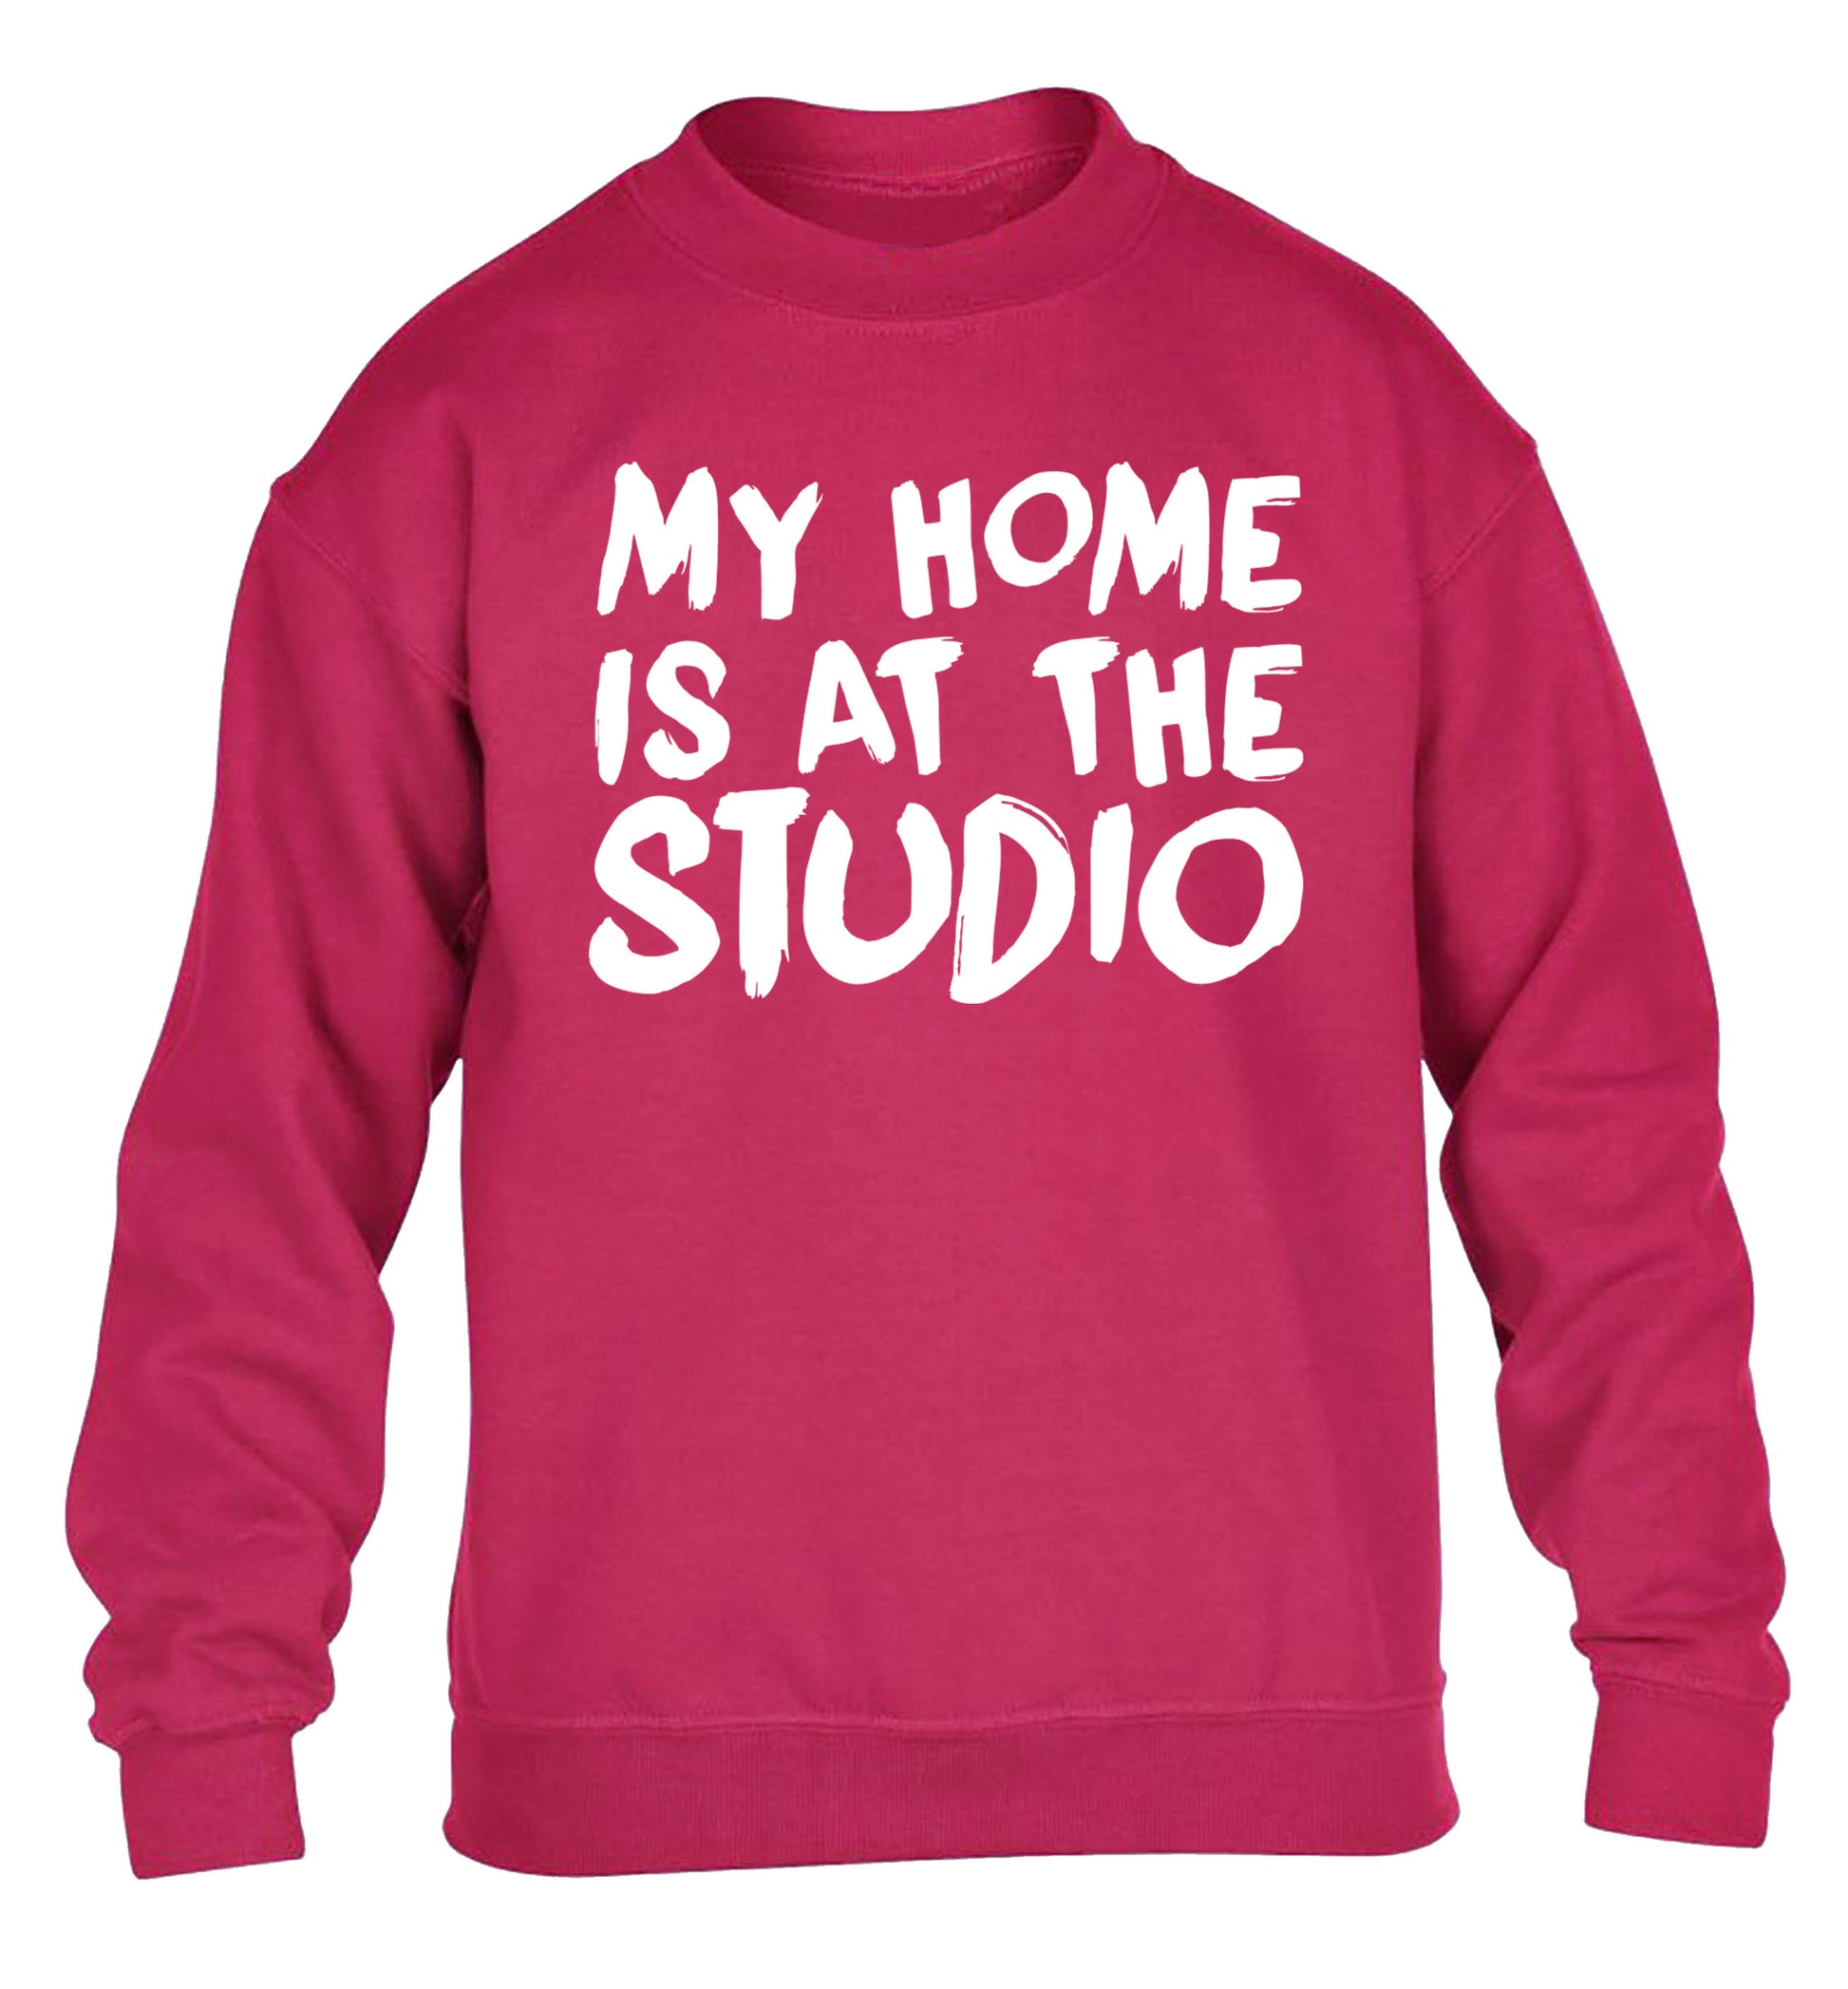 My home is at the studio children's pink sweater 12-14 Years